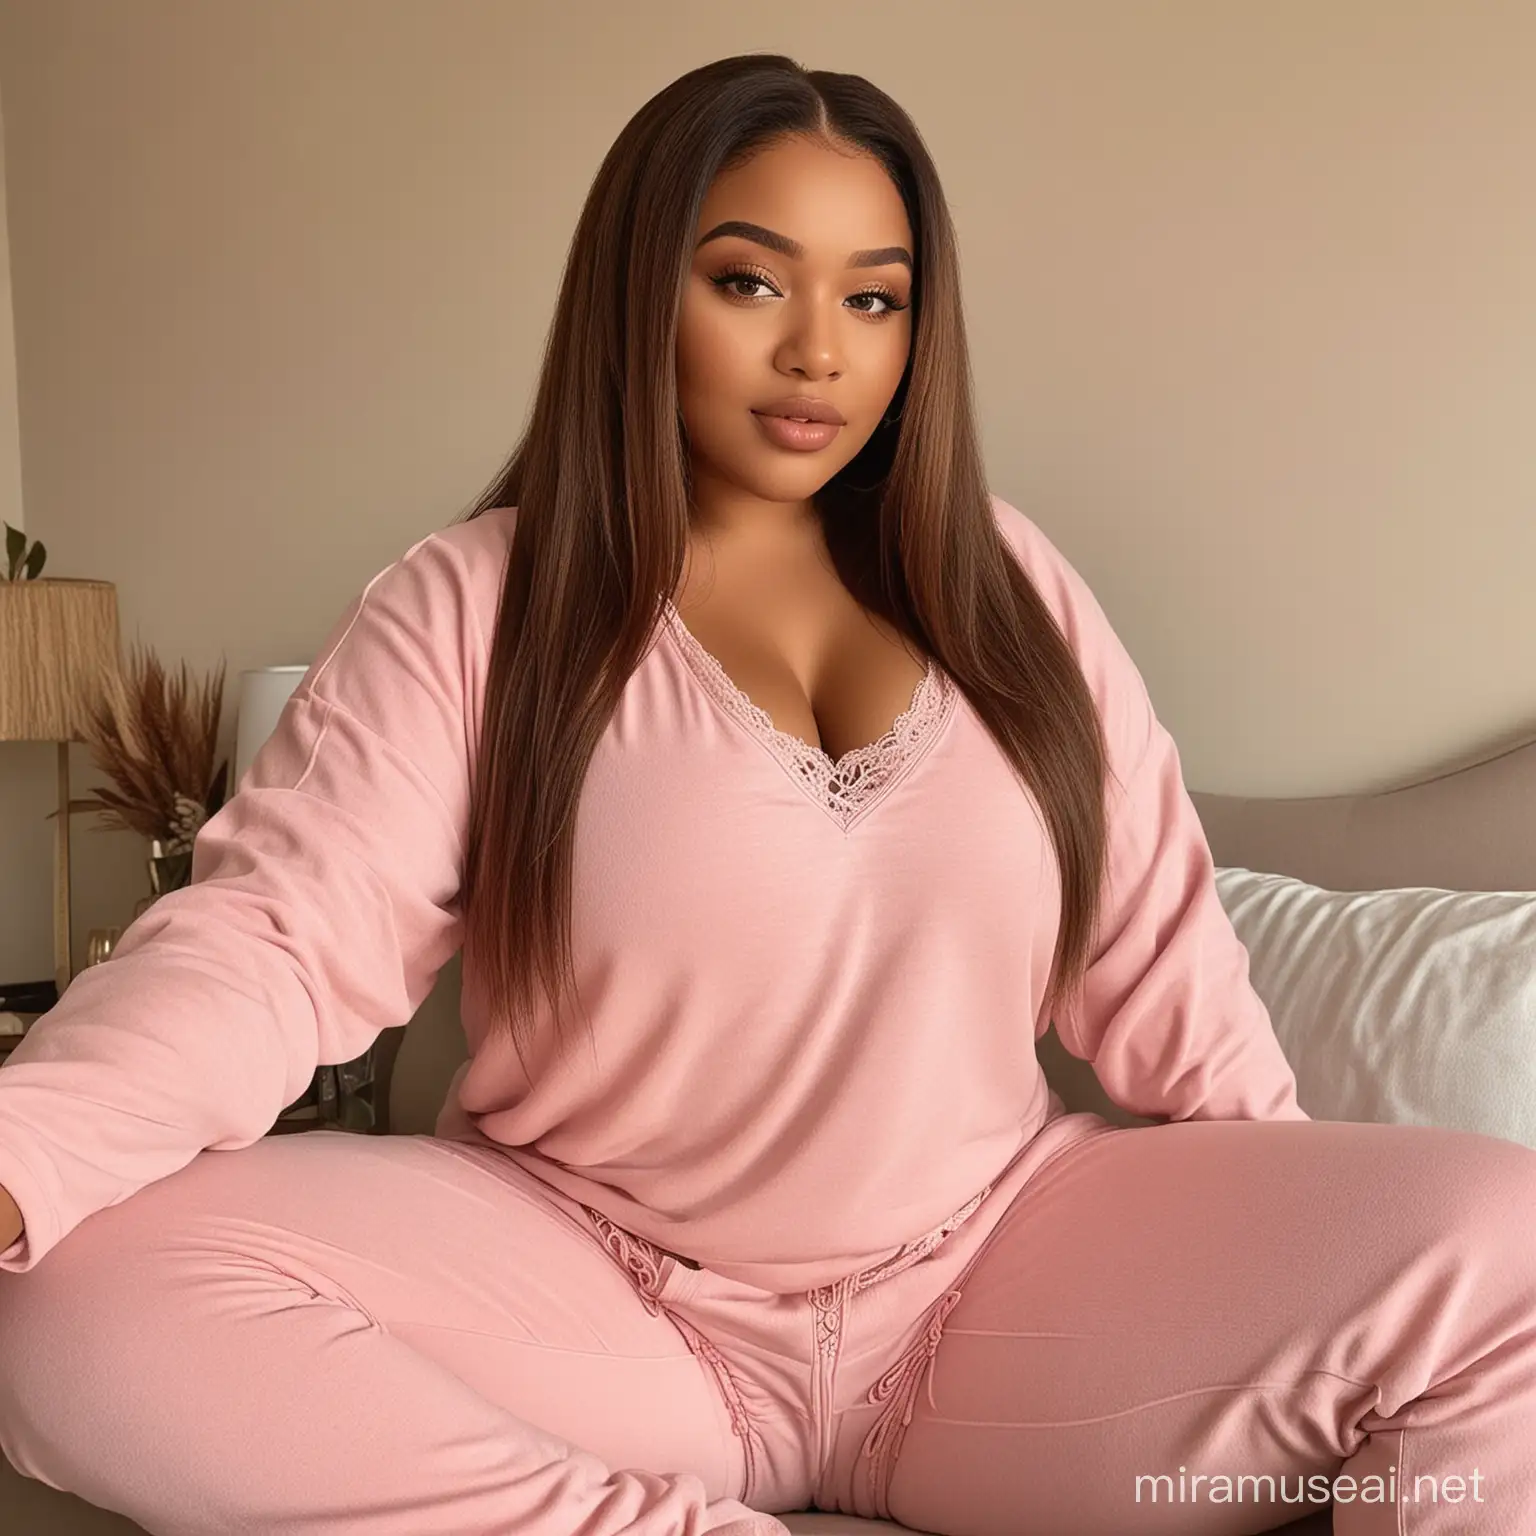 Image prompt/: generate pictures full body of a light skinned south african curvy, thick, plus size girl that looks like me, with a straight brown hd lace front weave, in comfy pink loungewear